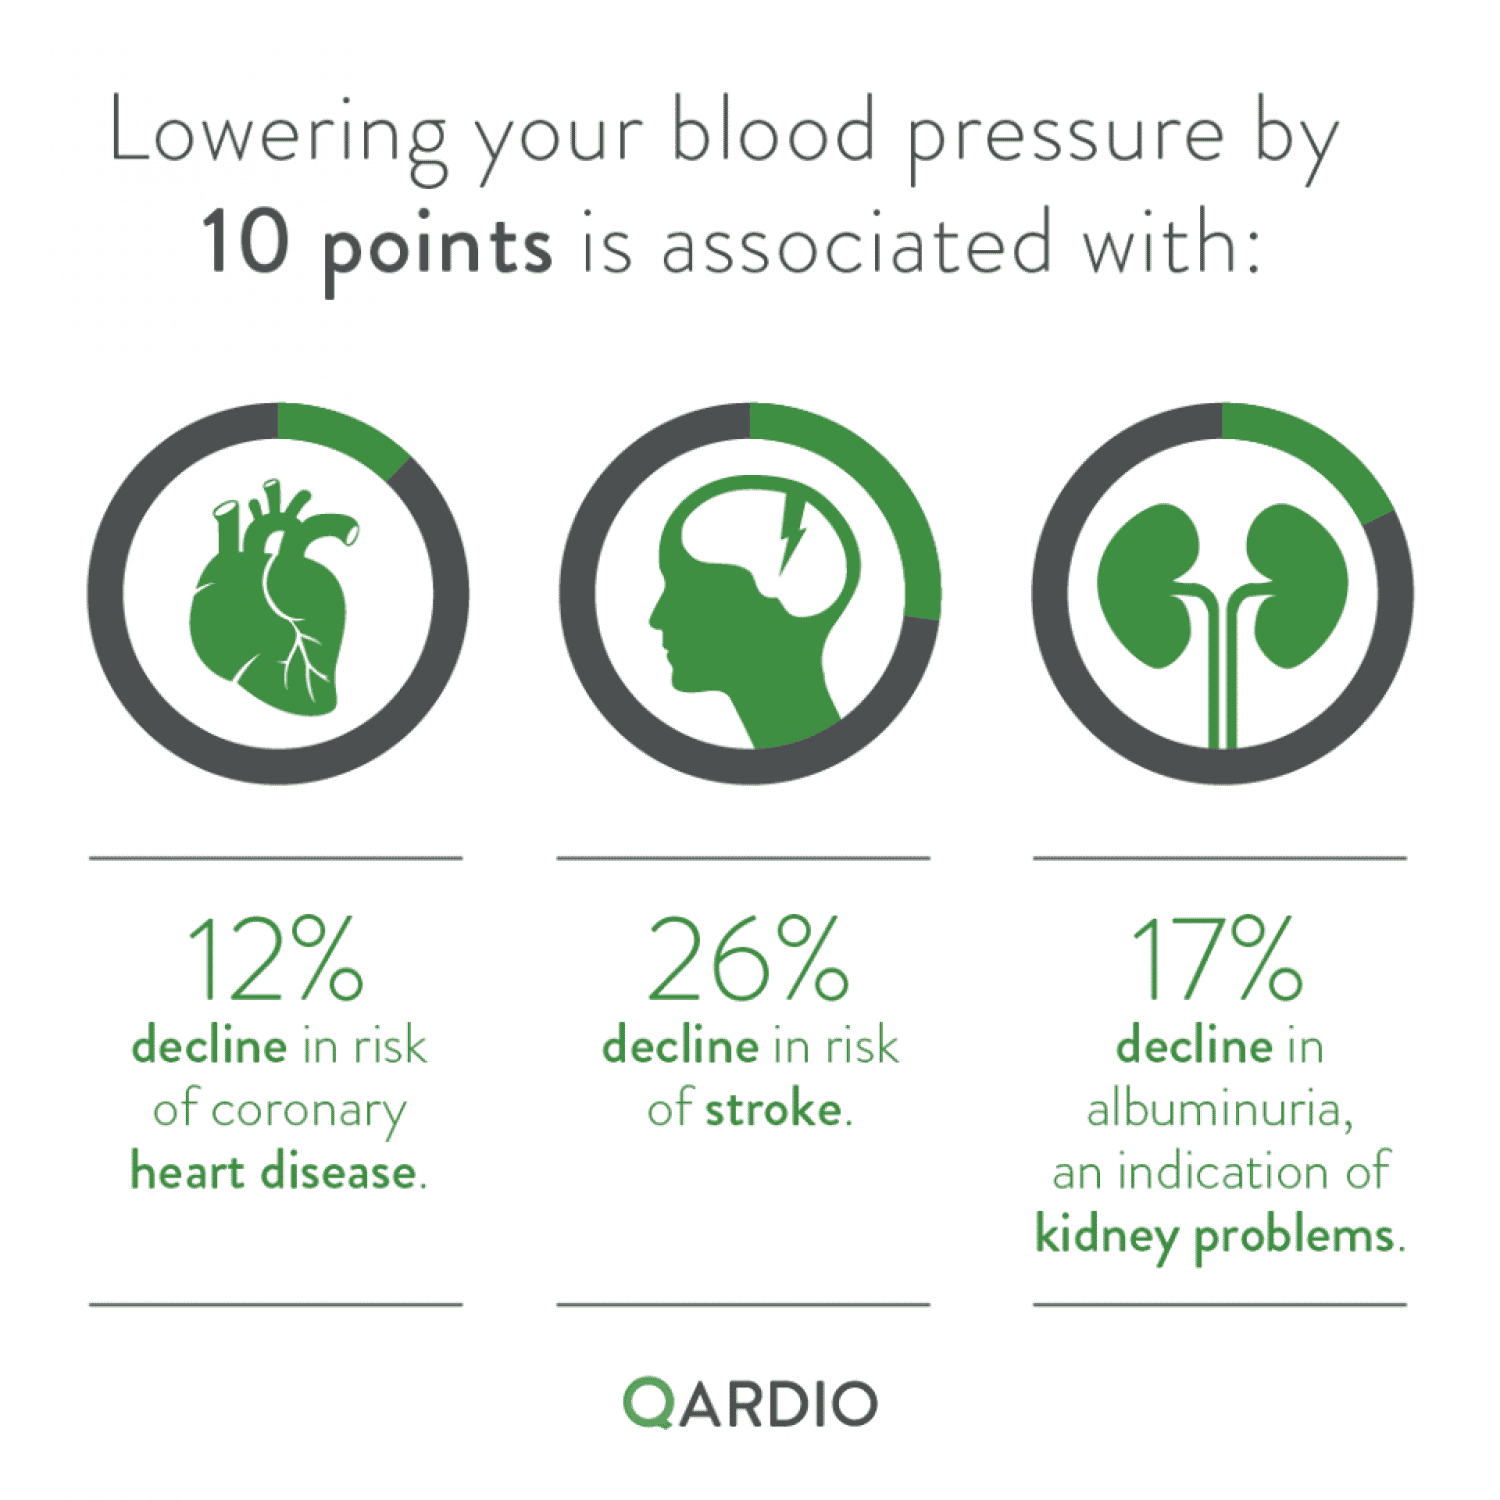 Benefits of Lowering Blood Pressure by Just 10 points